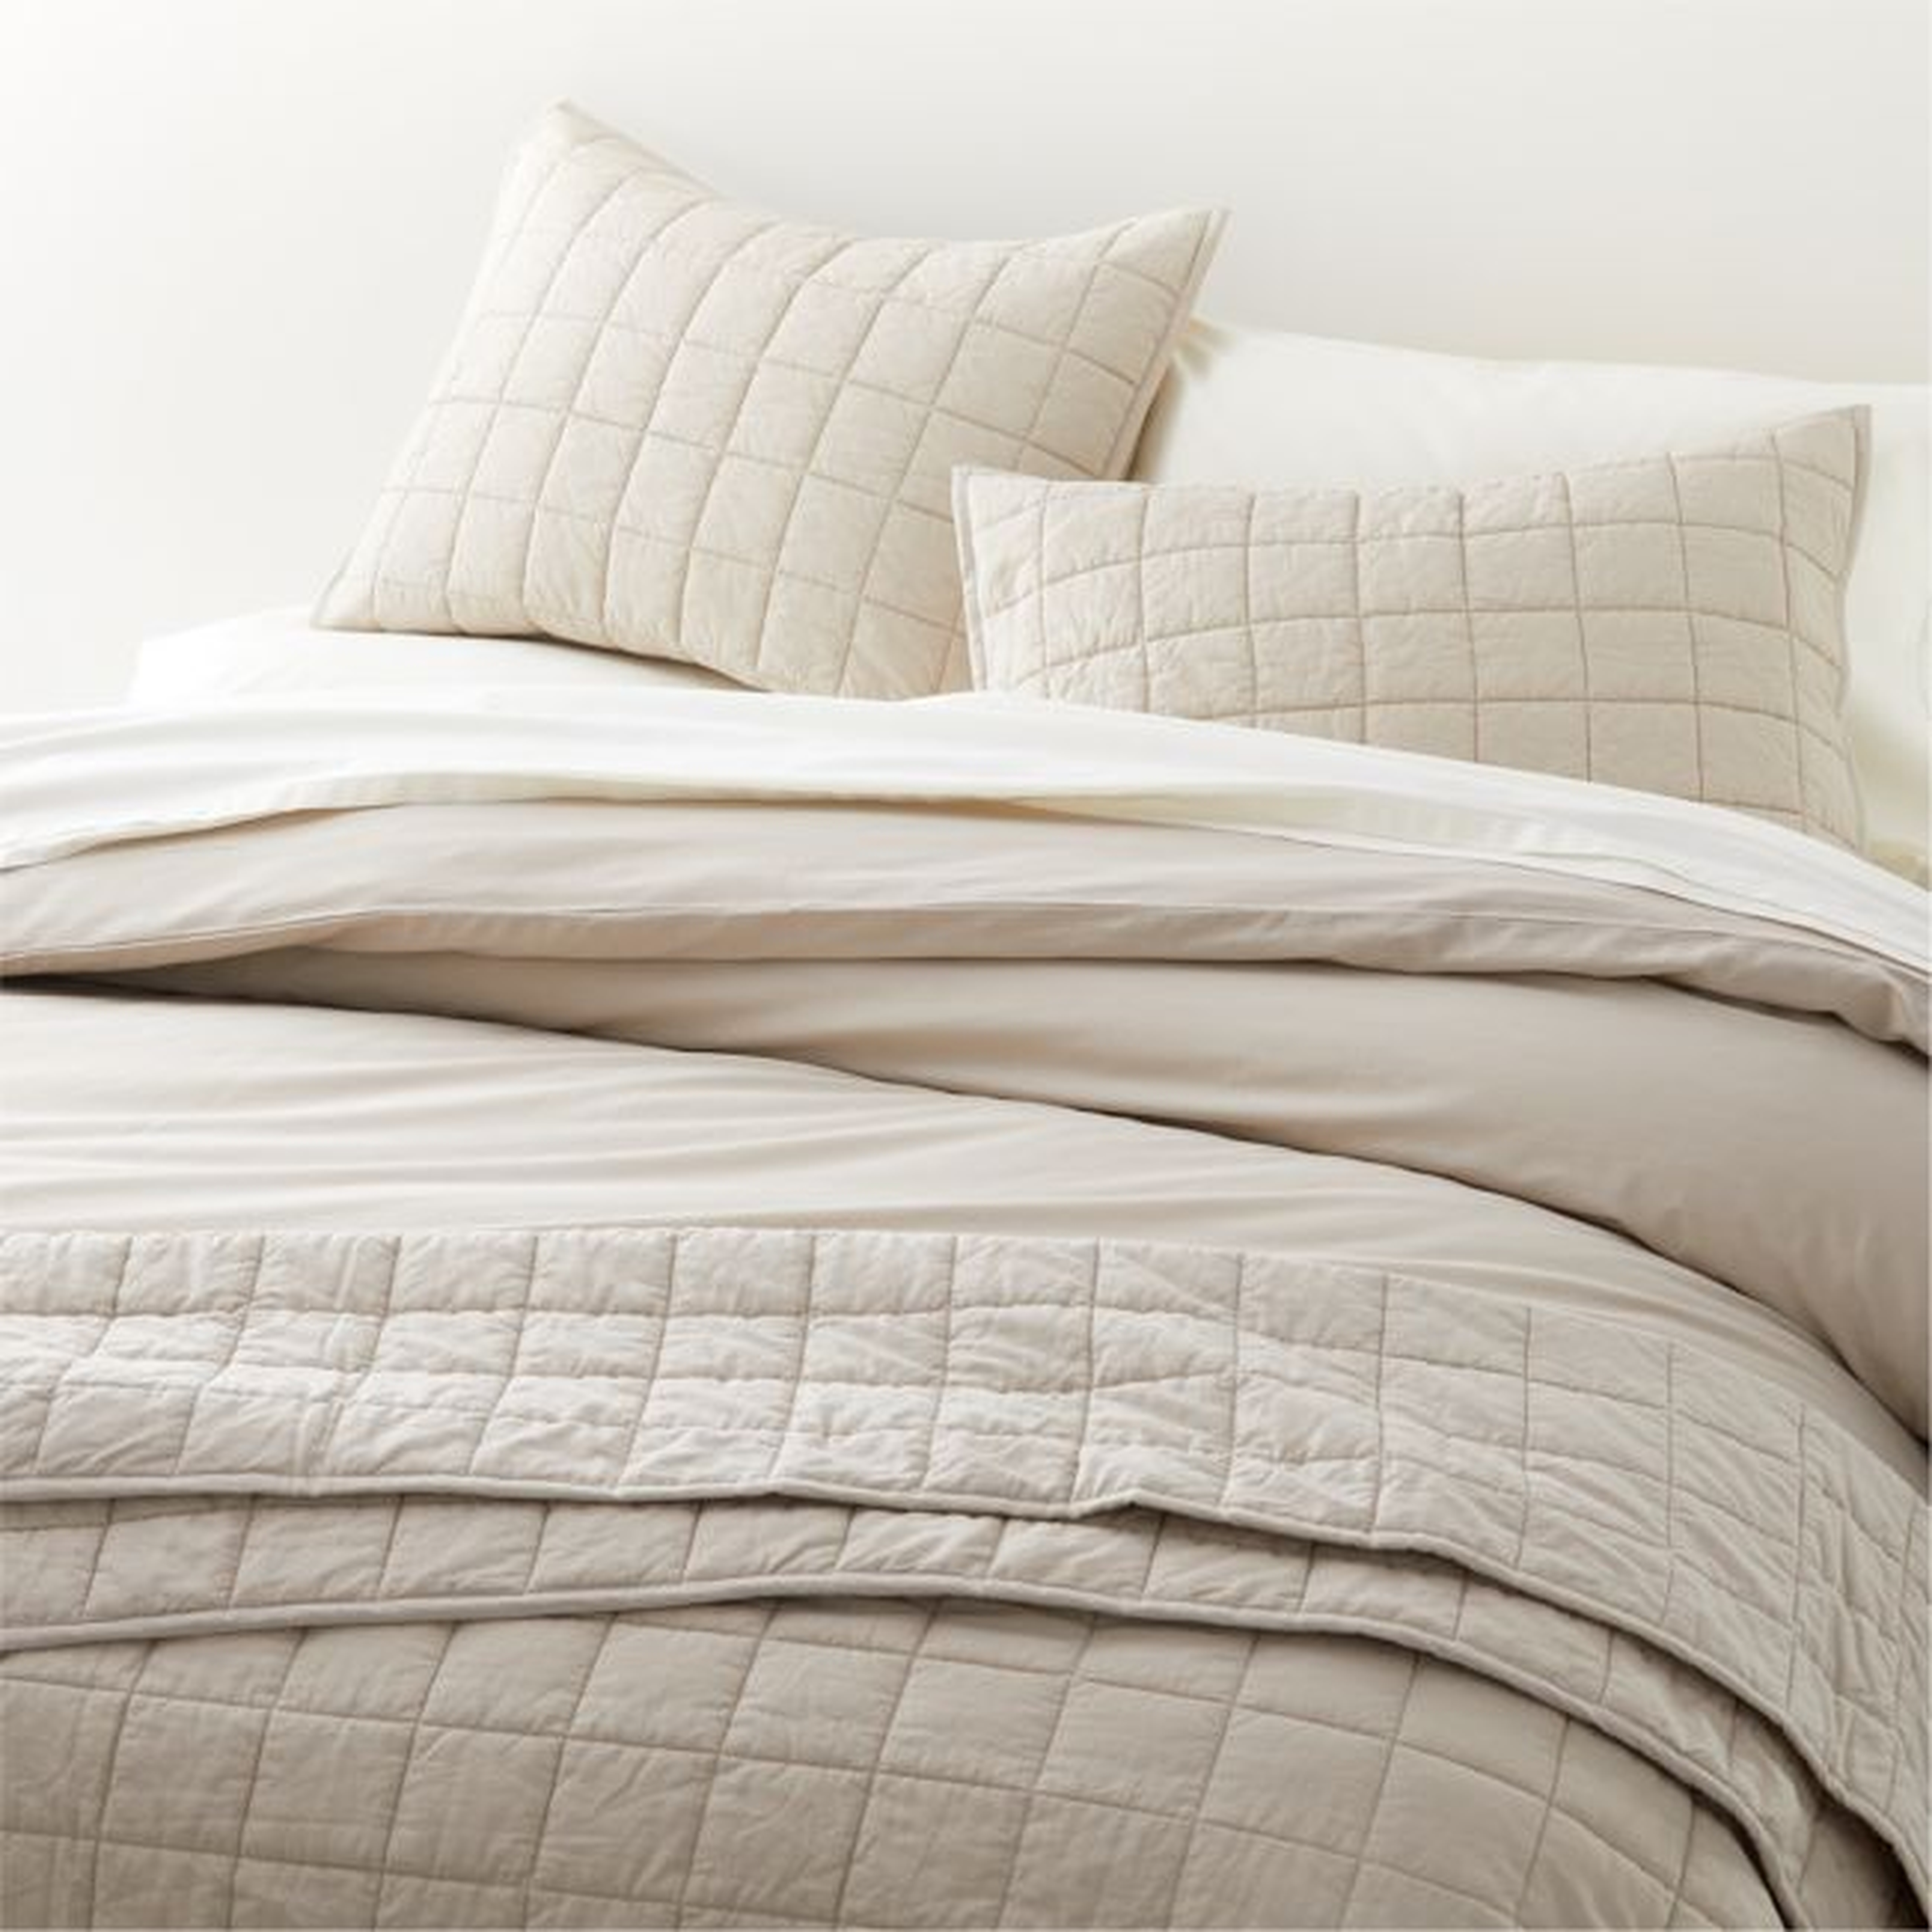 Mellow Beige Cotton King Quilt - Crate and Barrel